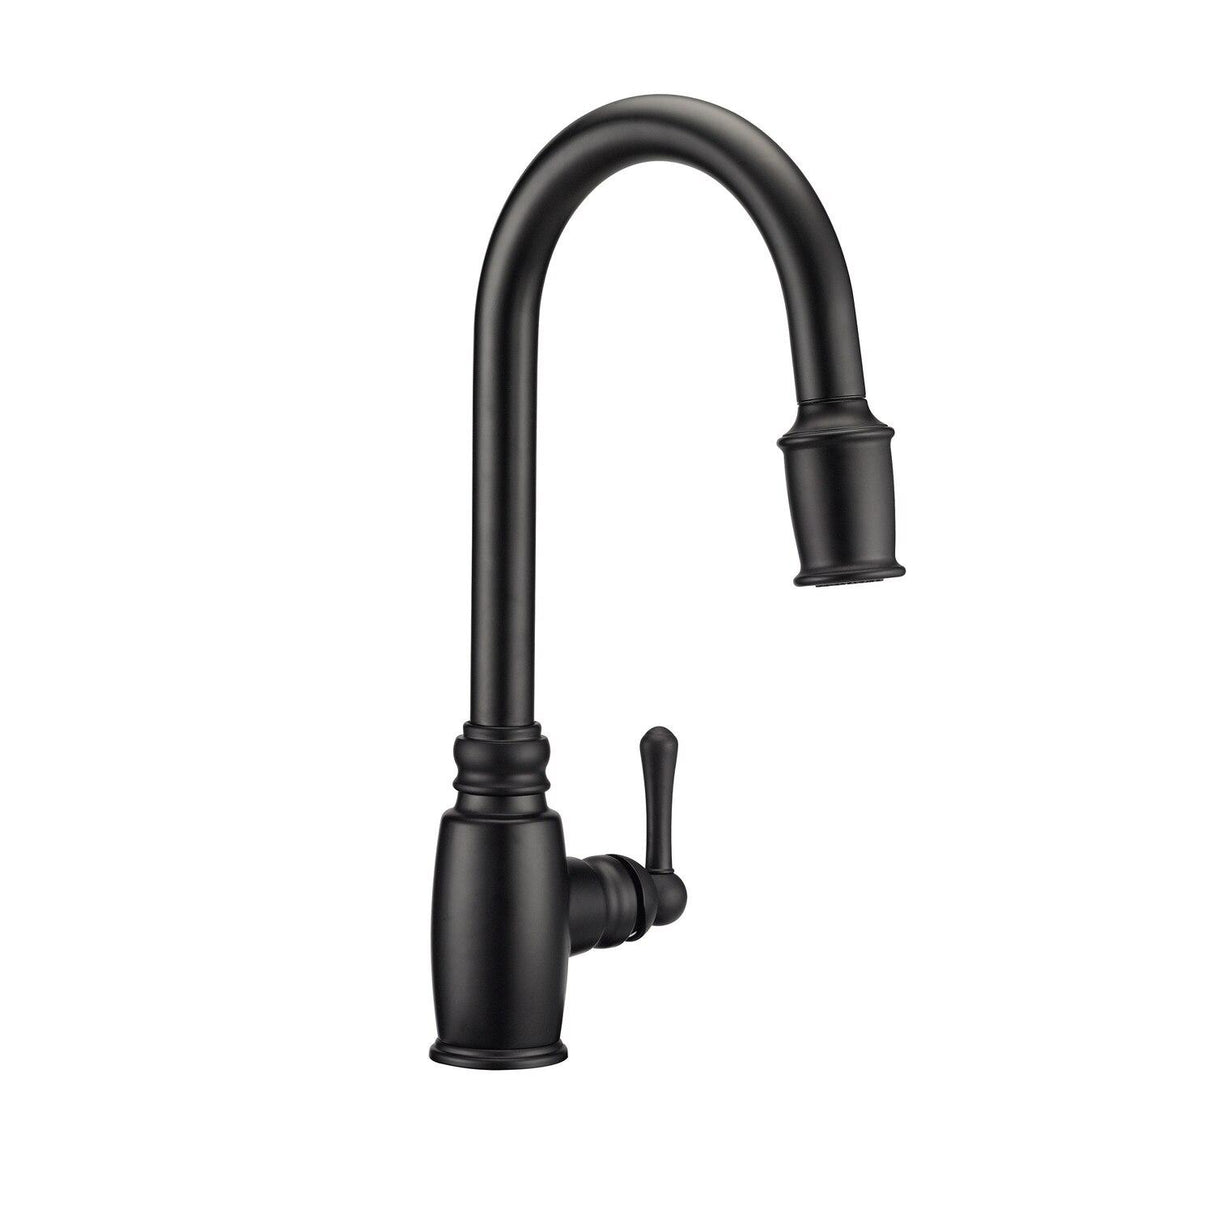 Gerber D454057SS Stainless Steel Opulence Single Handle Pull-down Kitchen Faucet